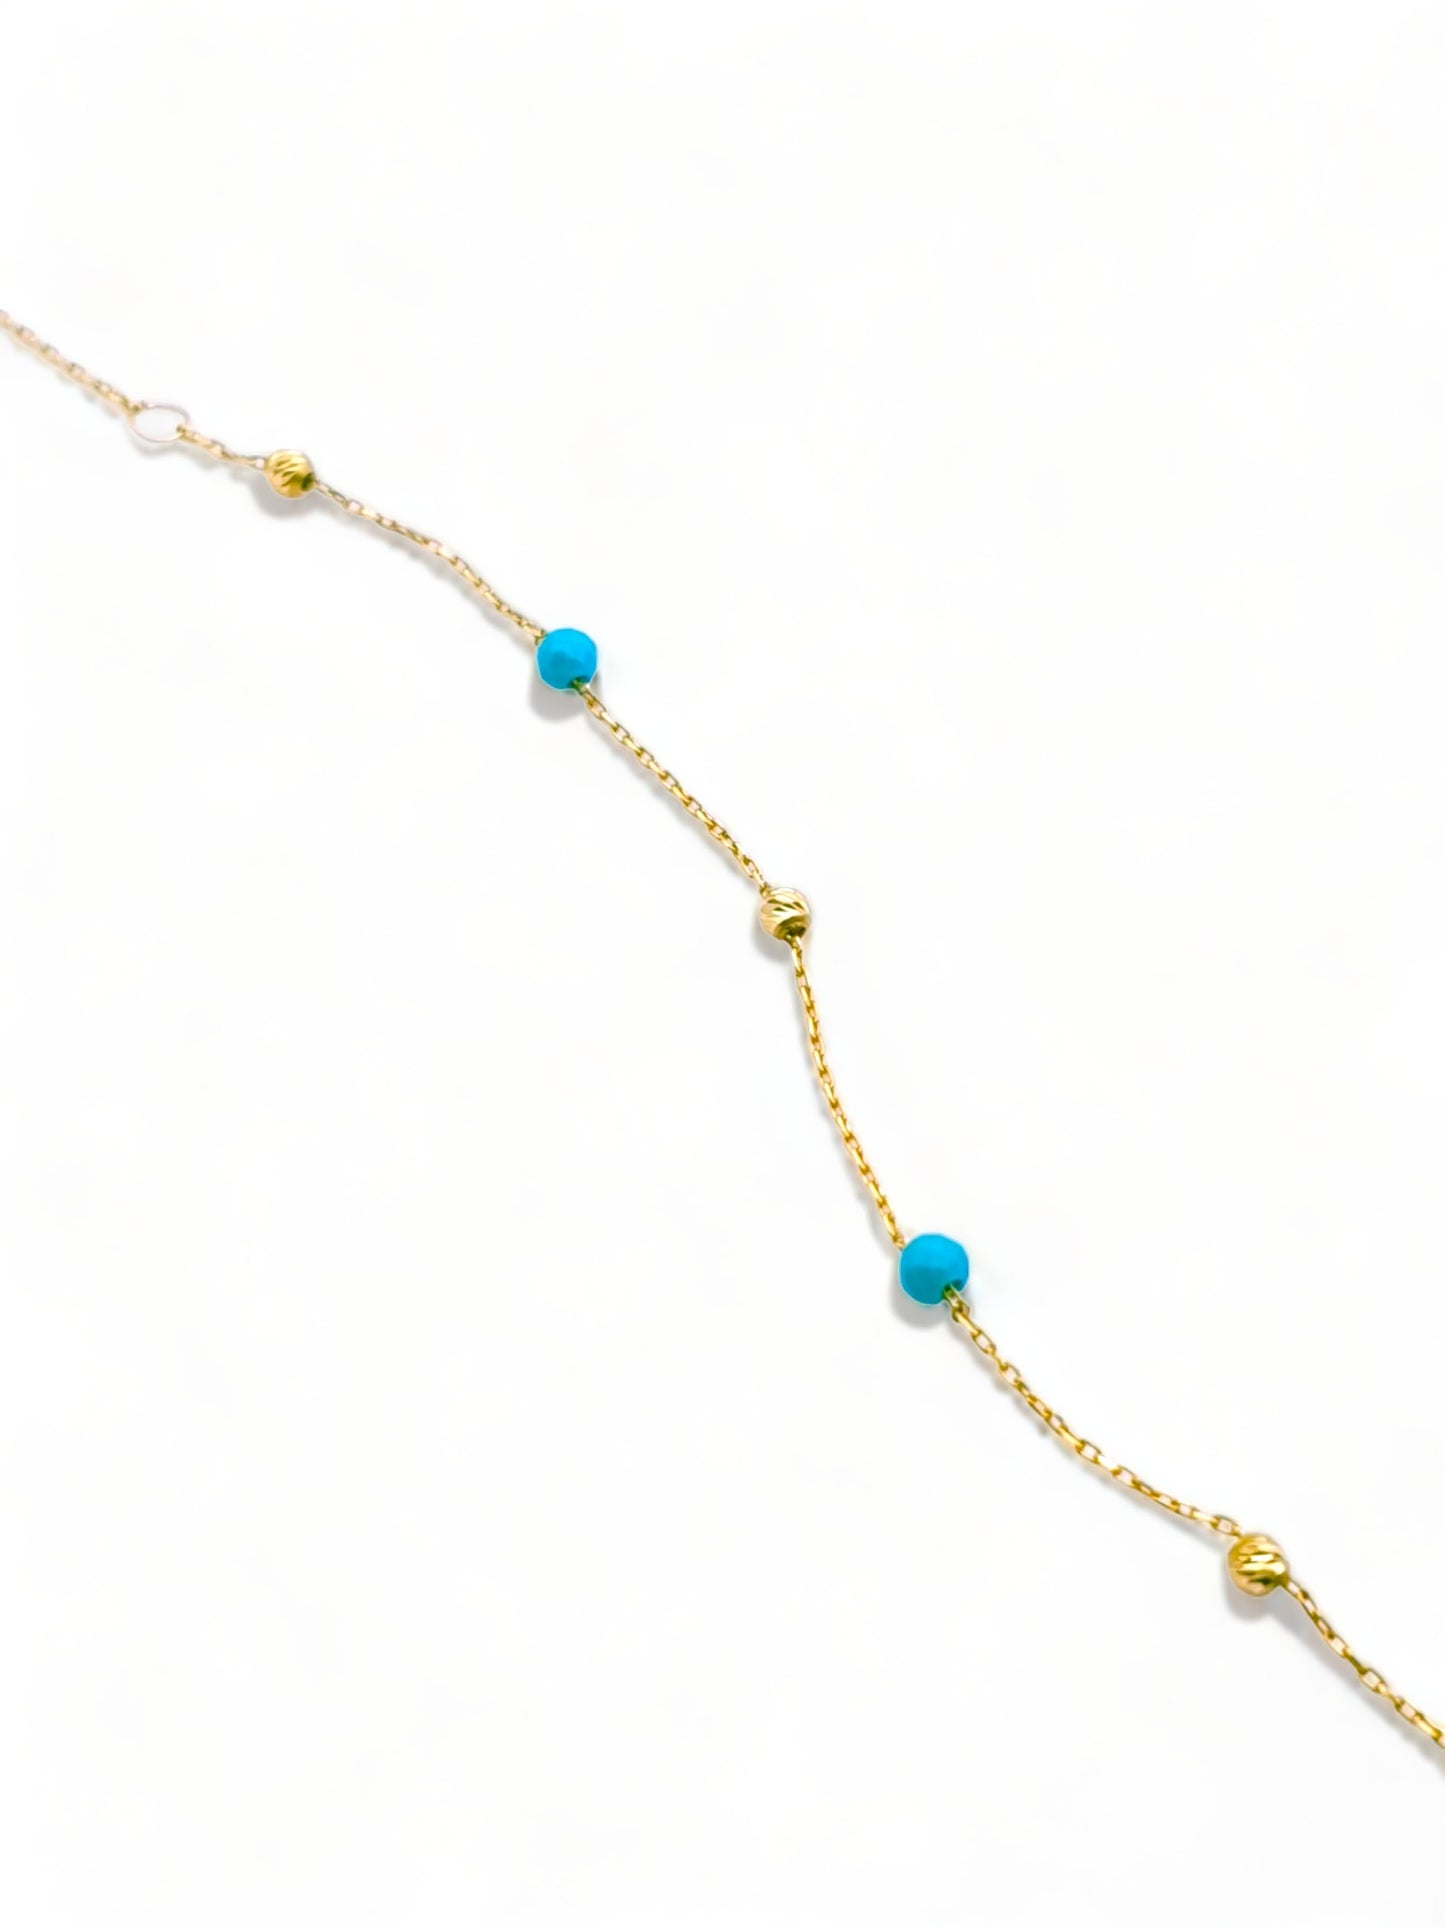 Solid 18ct Gold Women's - Gold & Turquoise Bead Bracelet, top down photo